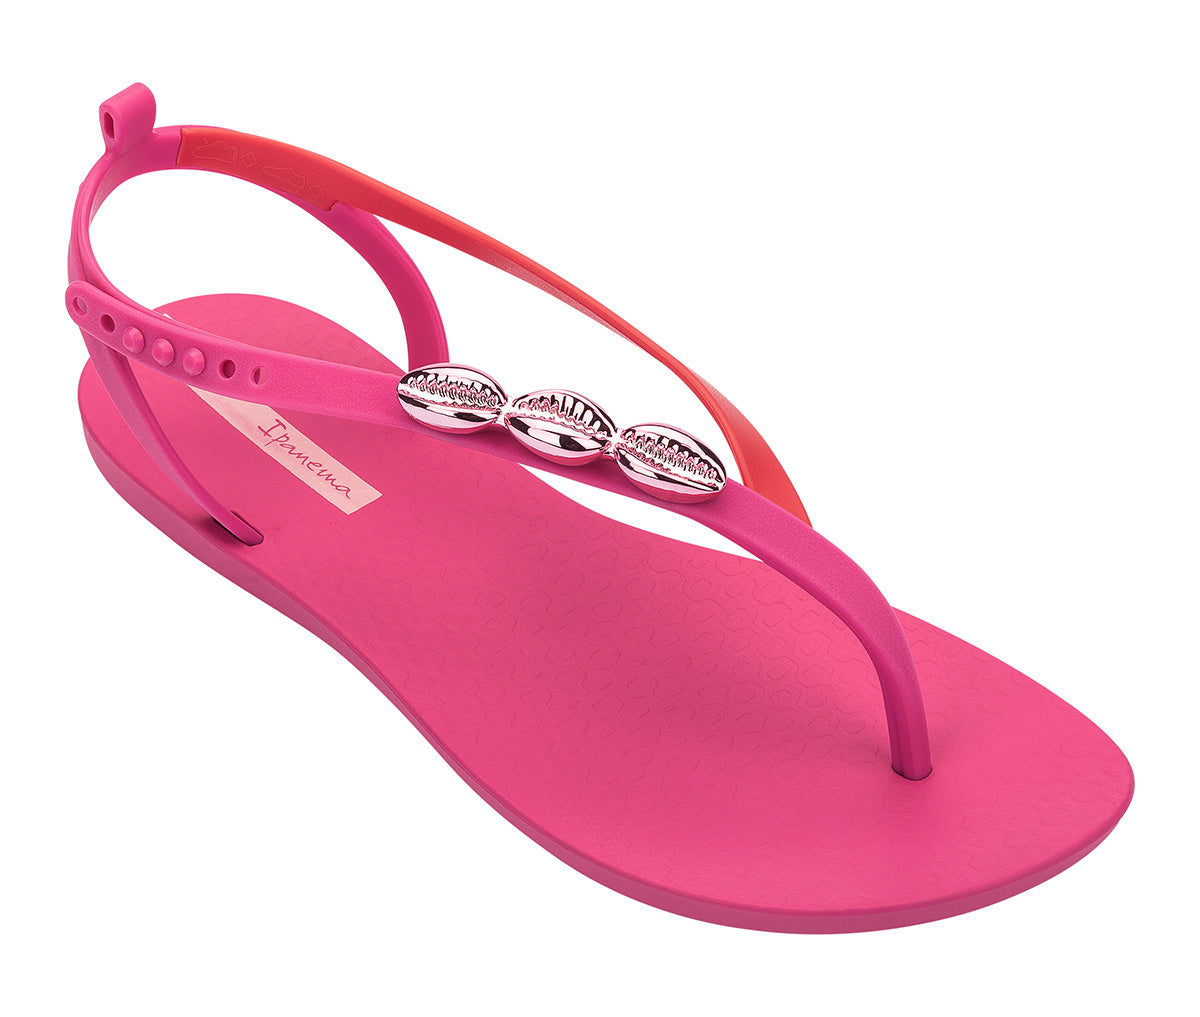 Angled view of a pink Ipanema Salty women's sandal with 3 pink metallic shells on the strap.